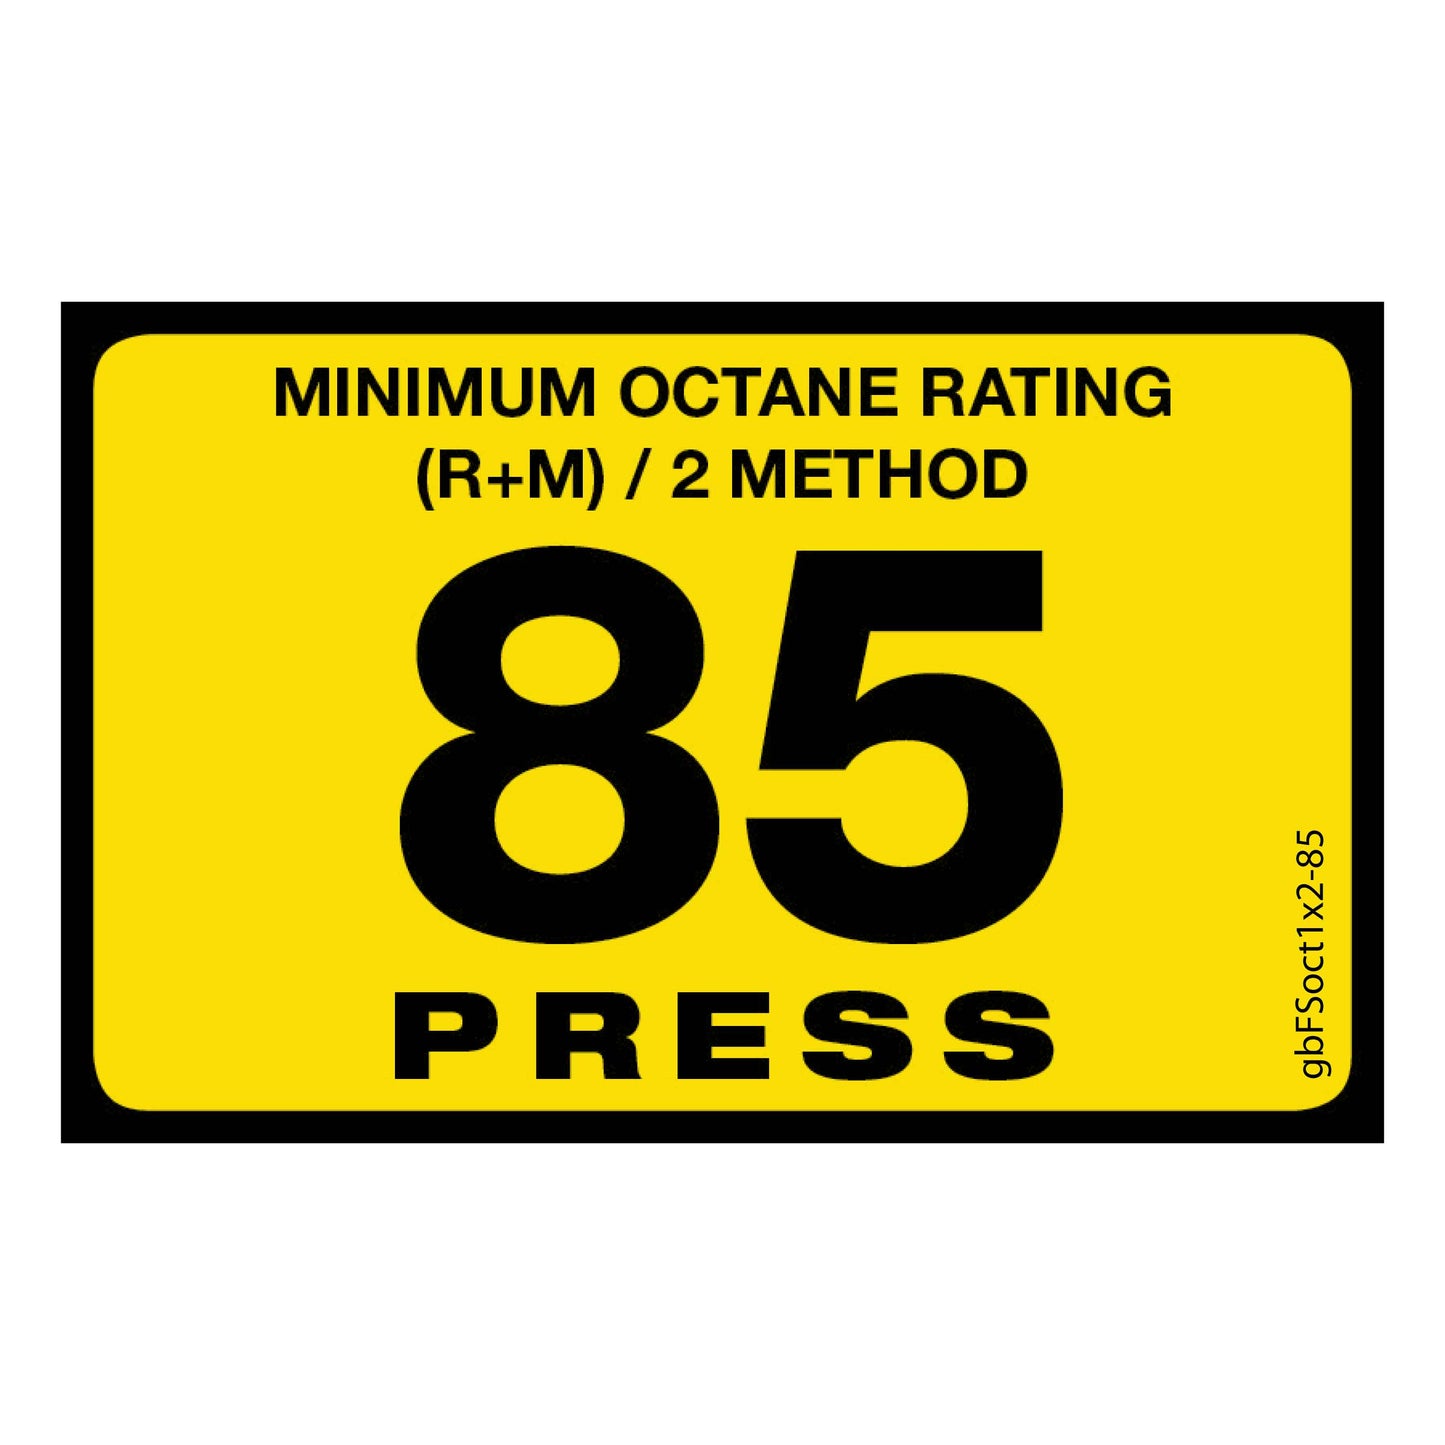 85 Press Octane Rating Decal. 1 inch by 2 inches in size. 